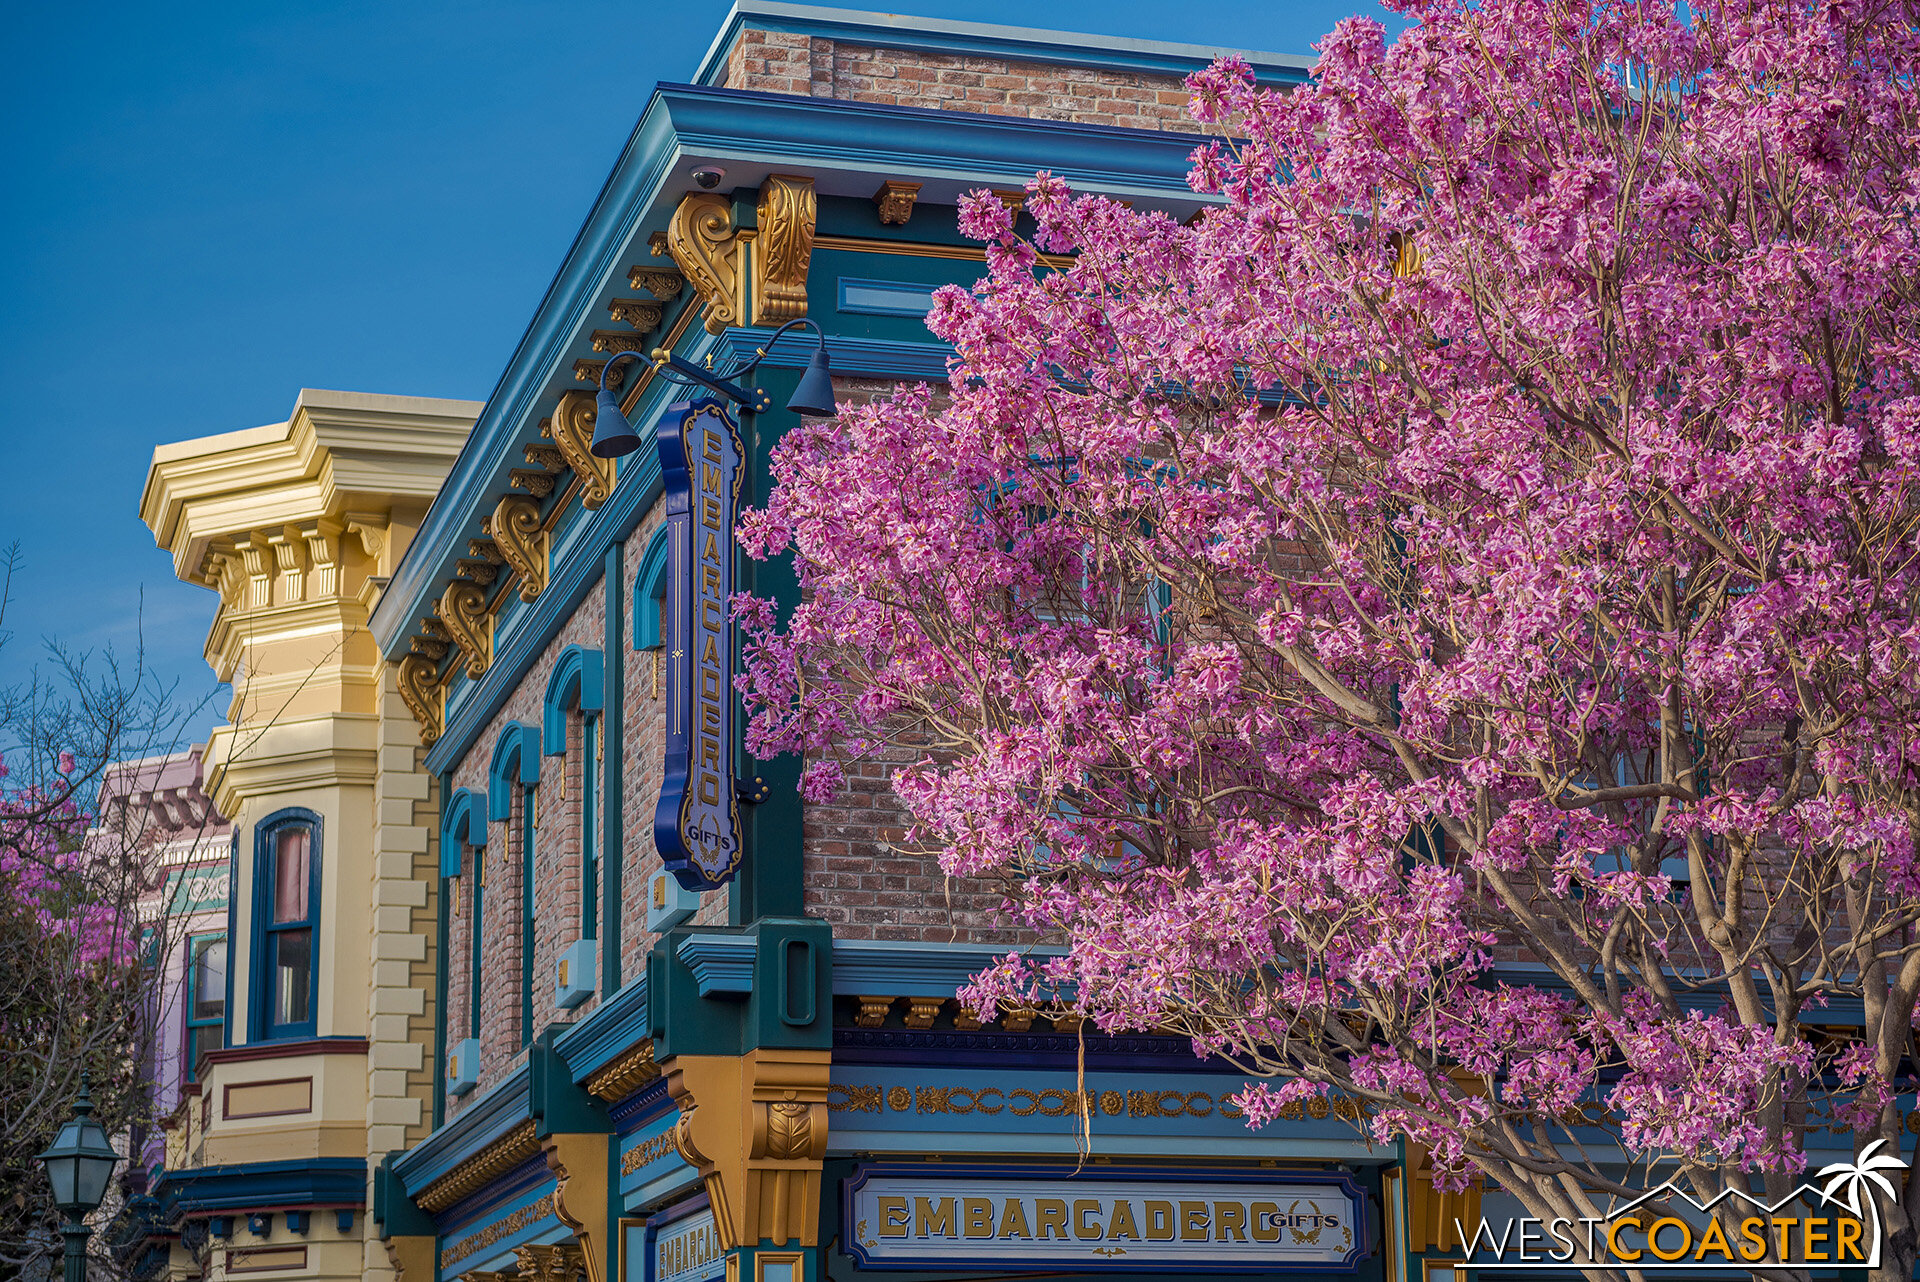  And over by Embarcadero Gifts at Pacific Wharf! 